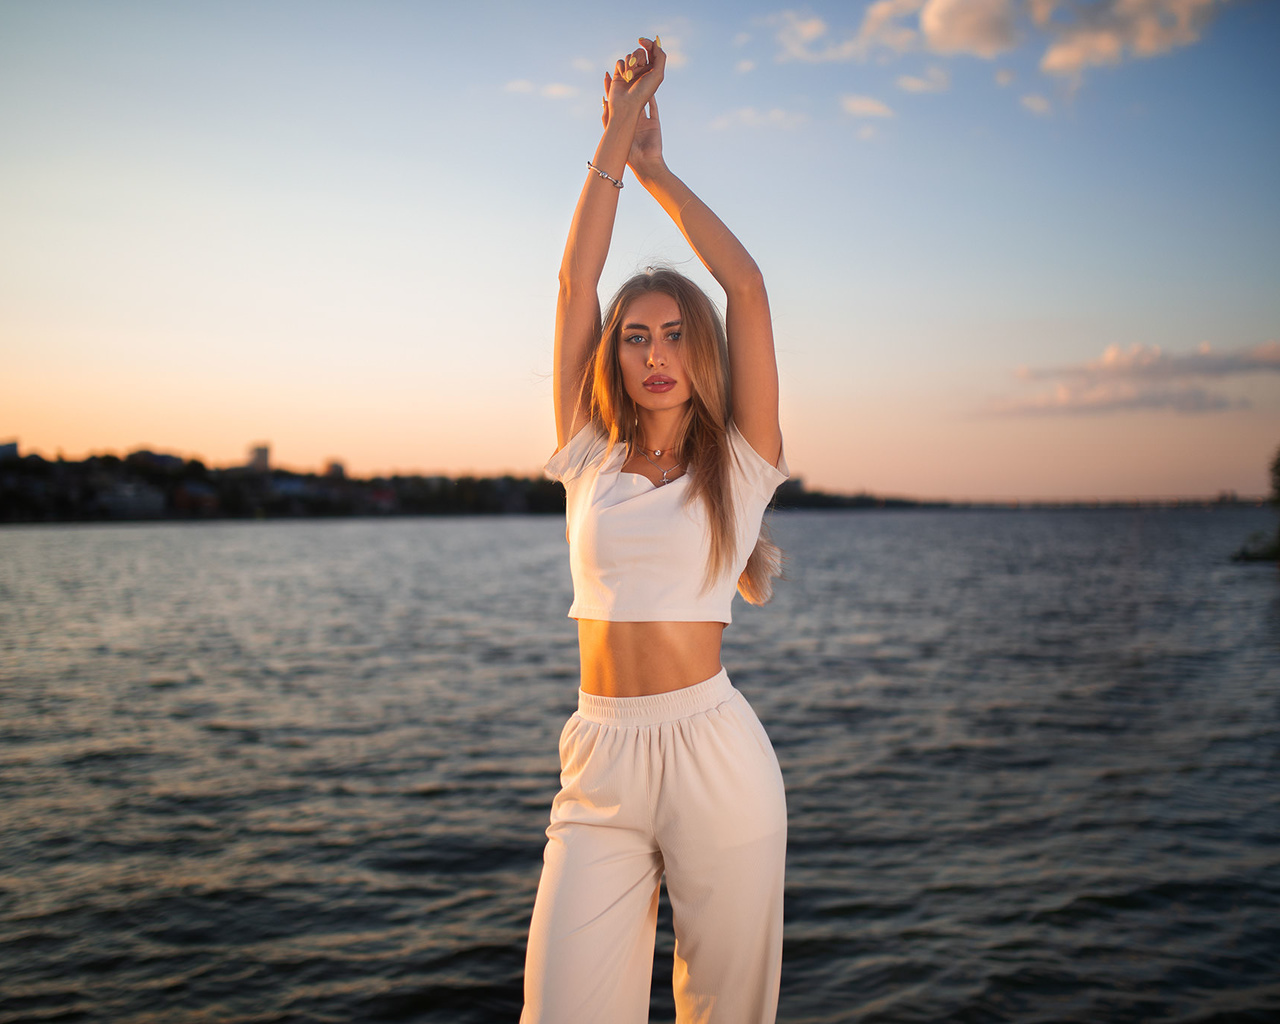 women, blonde, dmitry sn, arms up, river, sunset, women outdoors, white clothing, crucifix necklace, blue eyes, sky, clouds